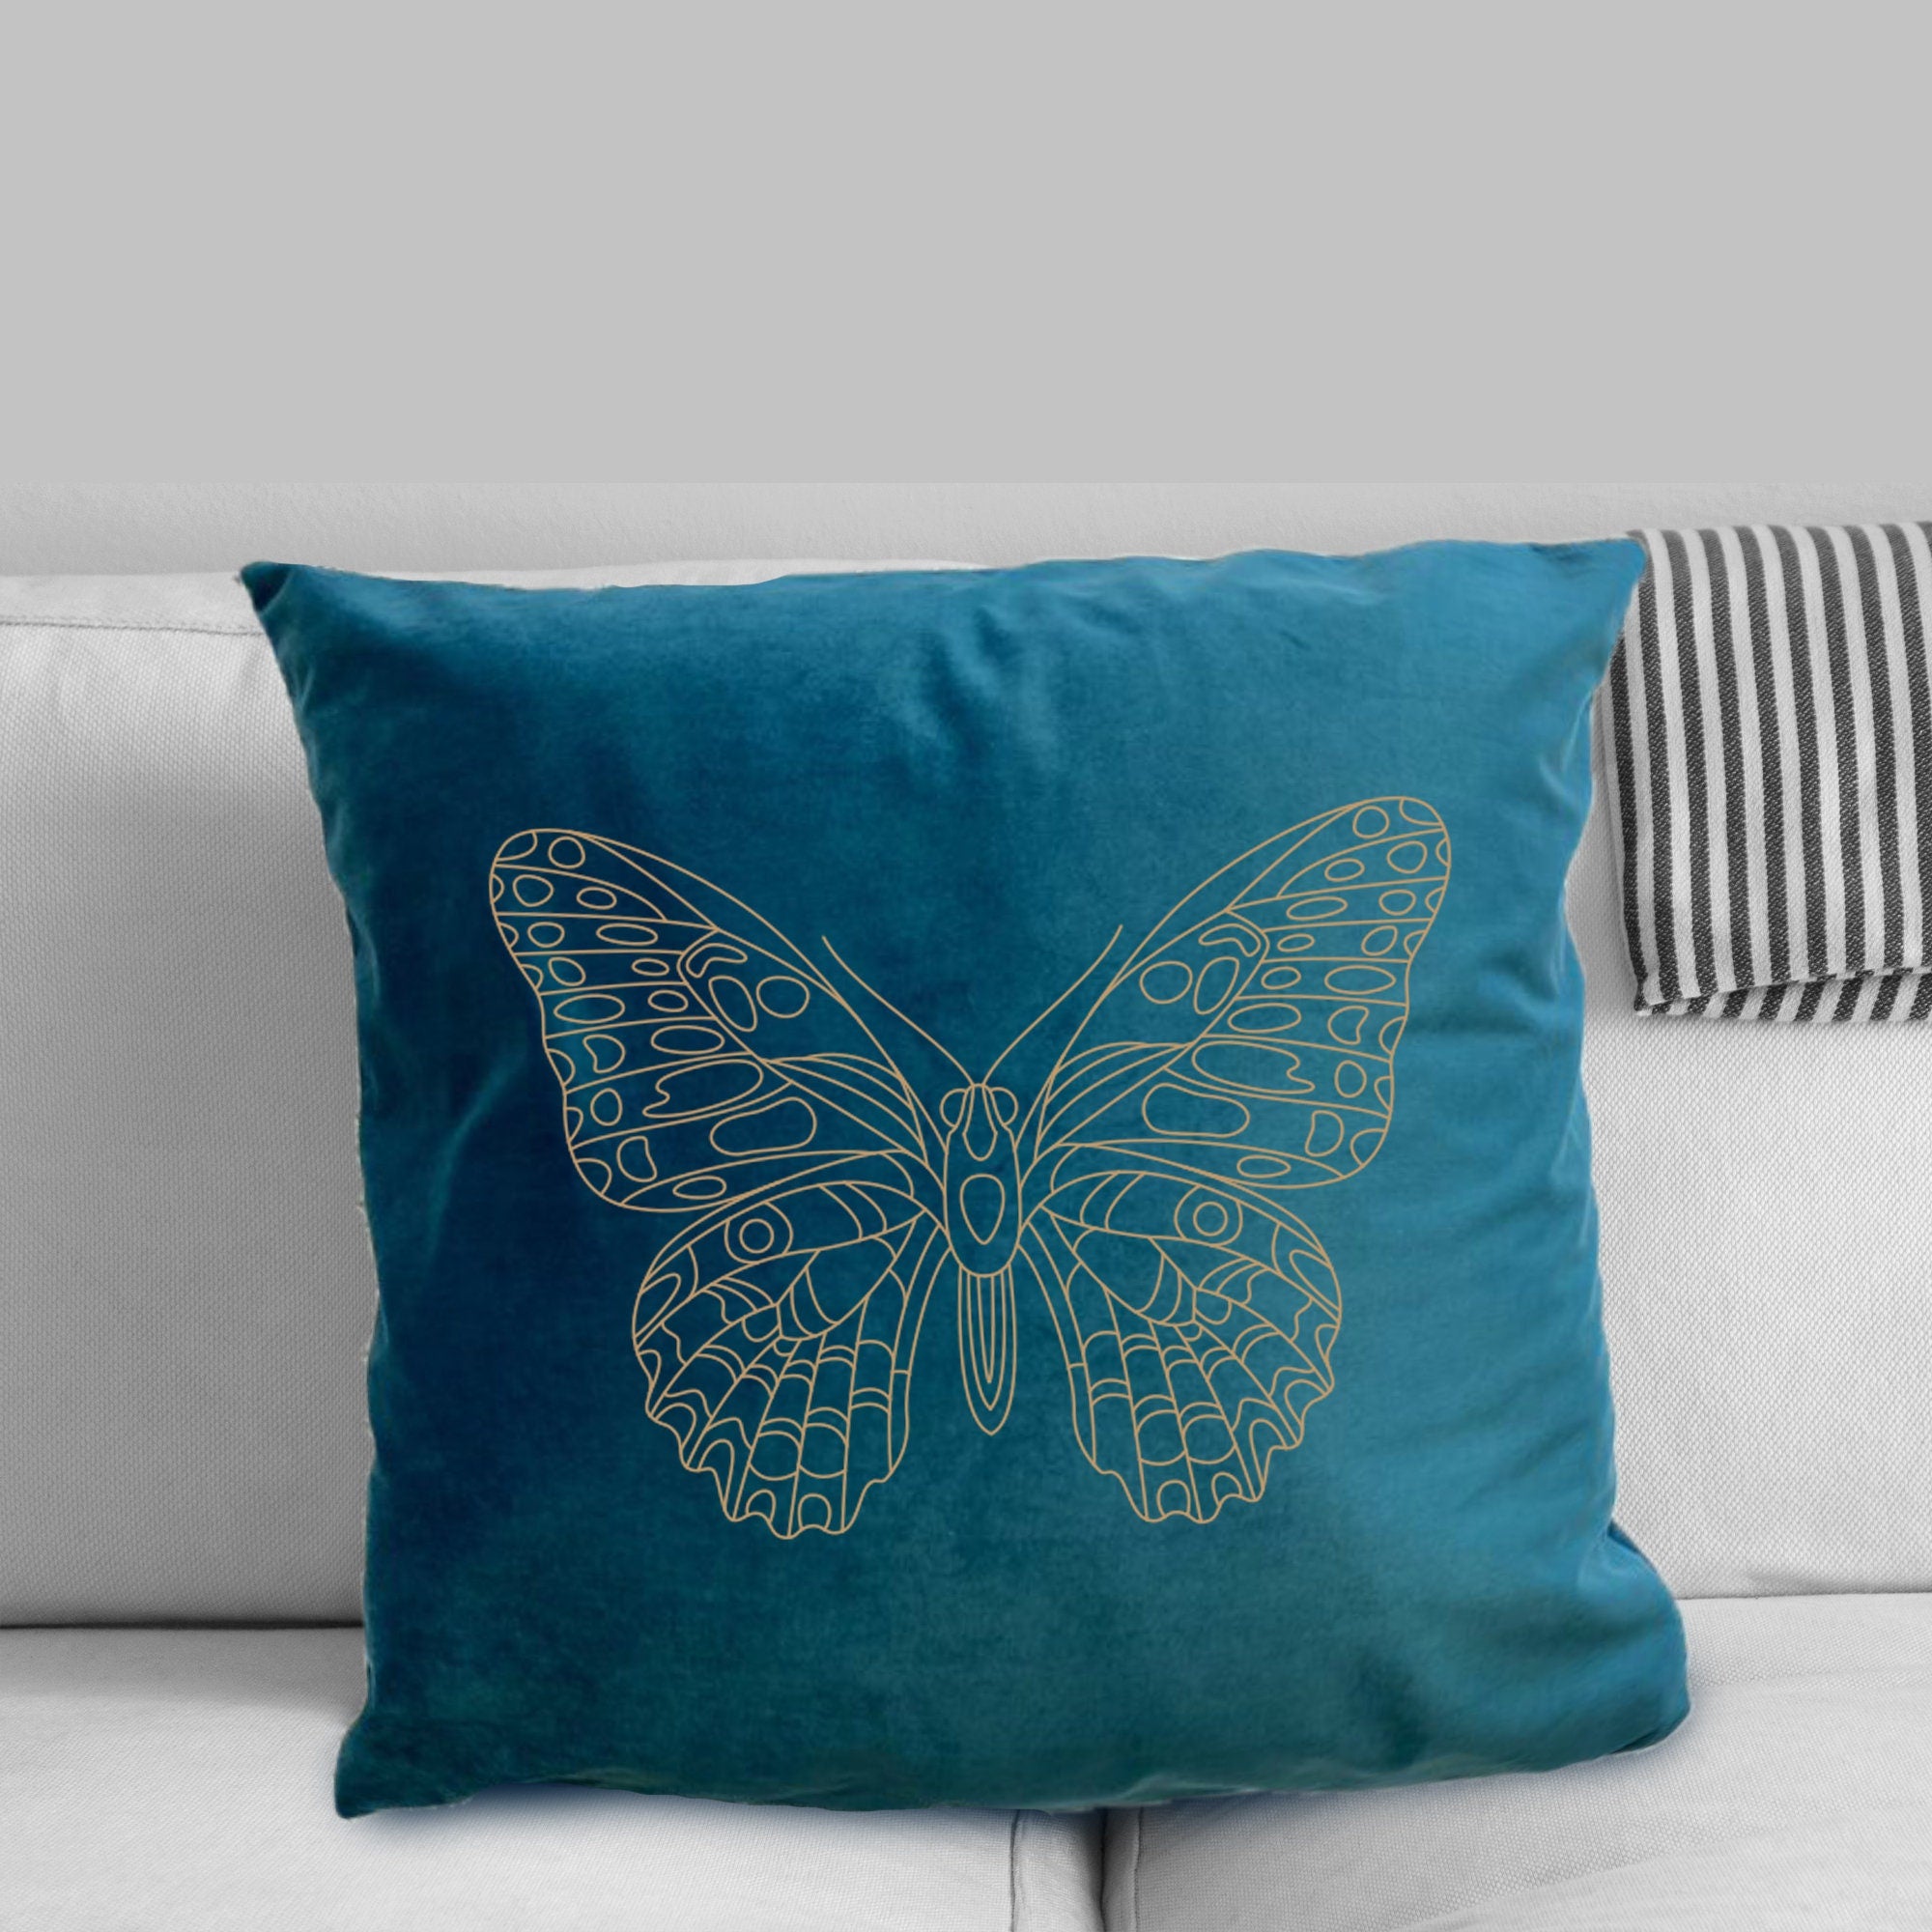 Decorative Velvet Cushion, Butterfly Dragonfly Scorpion Spider Gold foil print, Throw Pillow